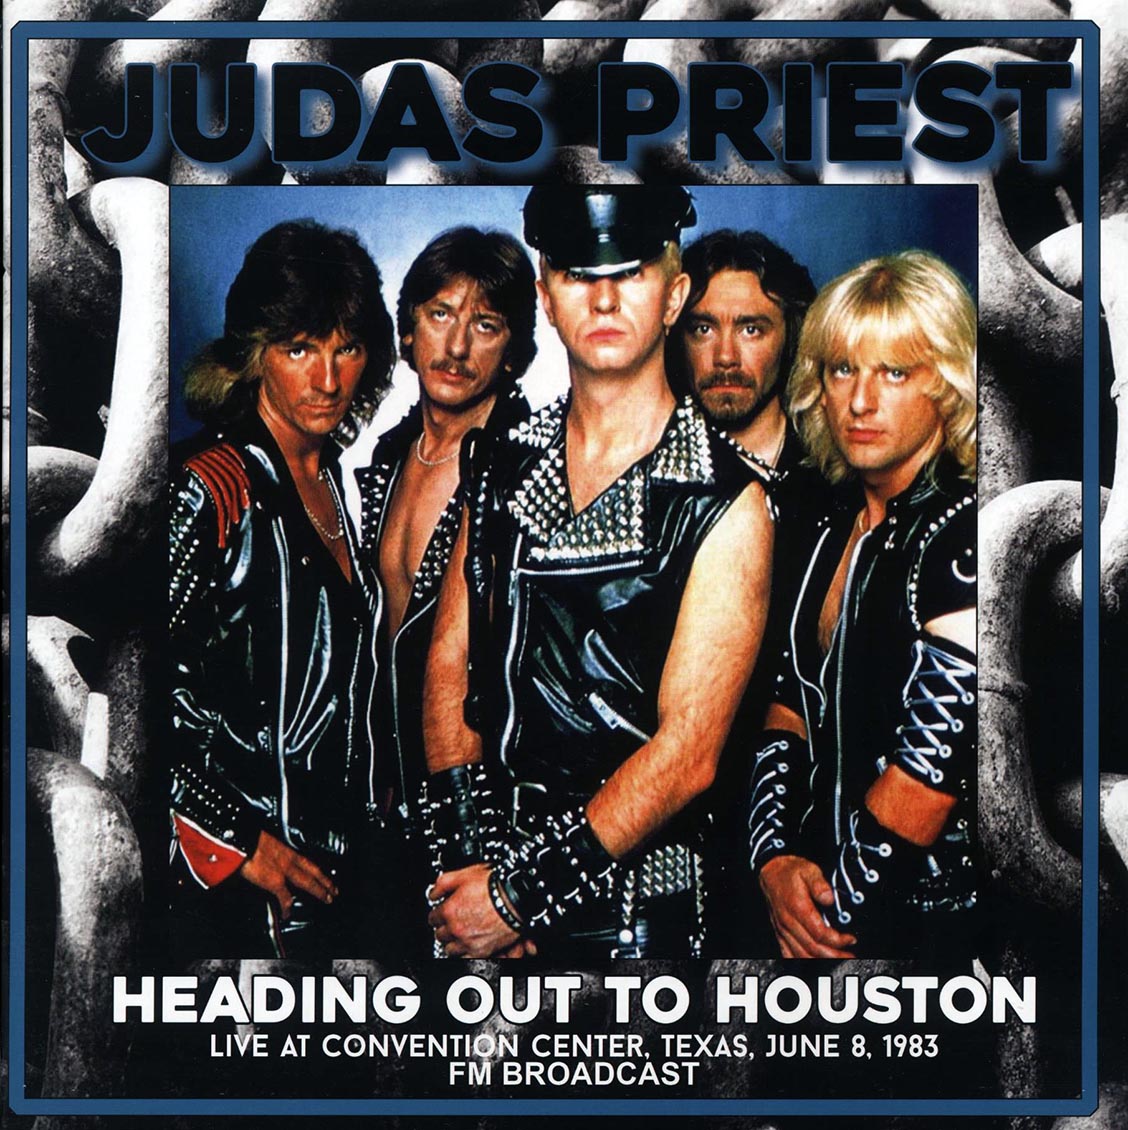 Judas Priest - Heading Out To Houston: Live At Convention Center, Texas, June 8, 1983 FM Broadcast - Vinyl LP